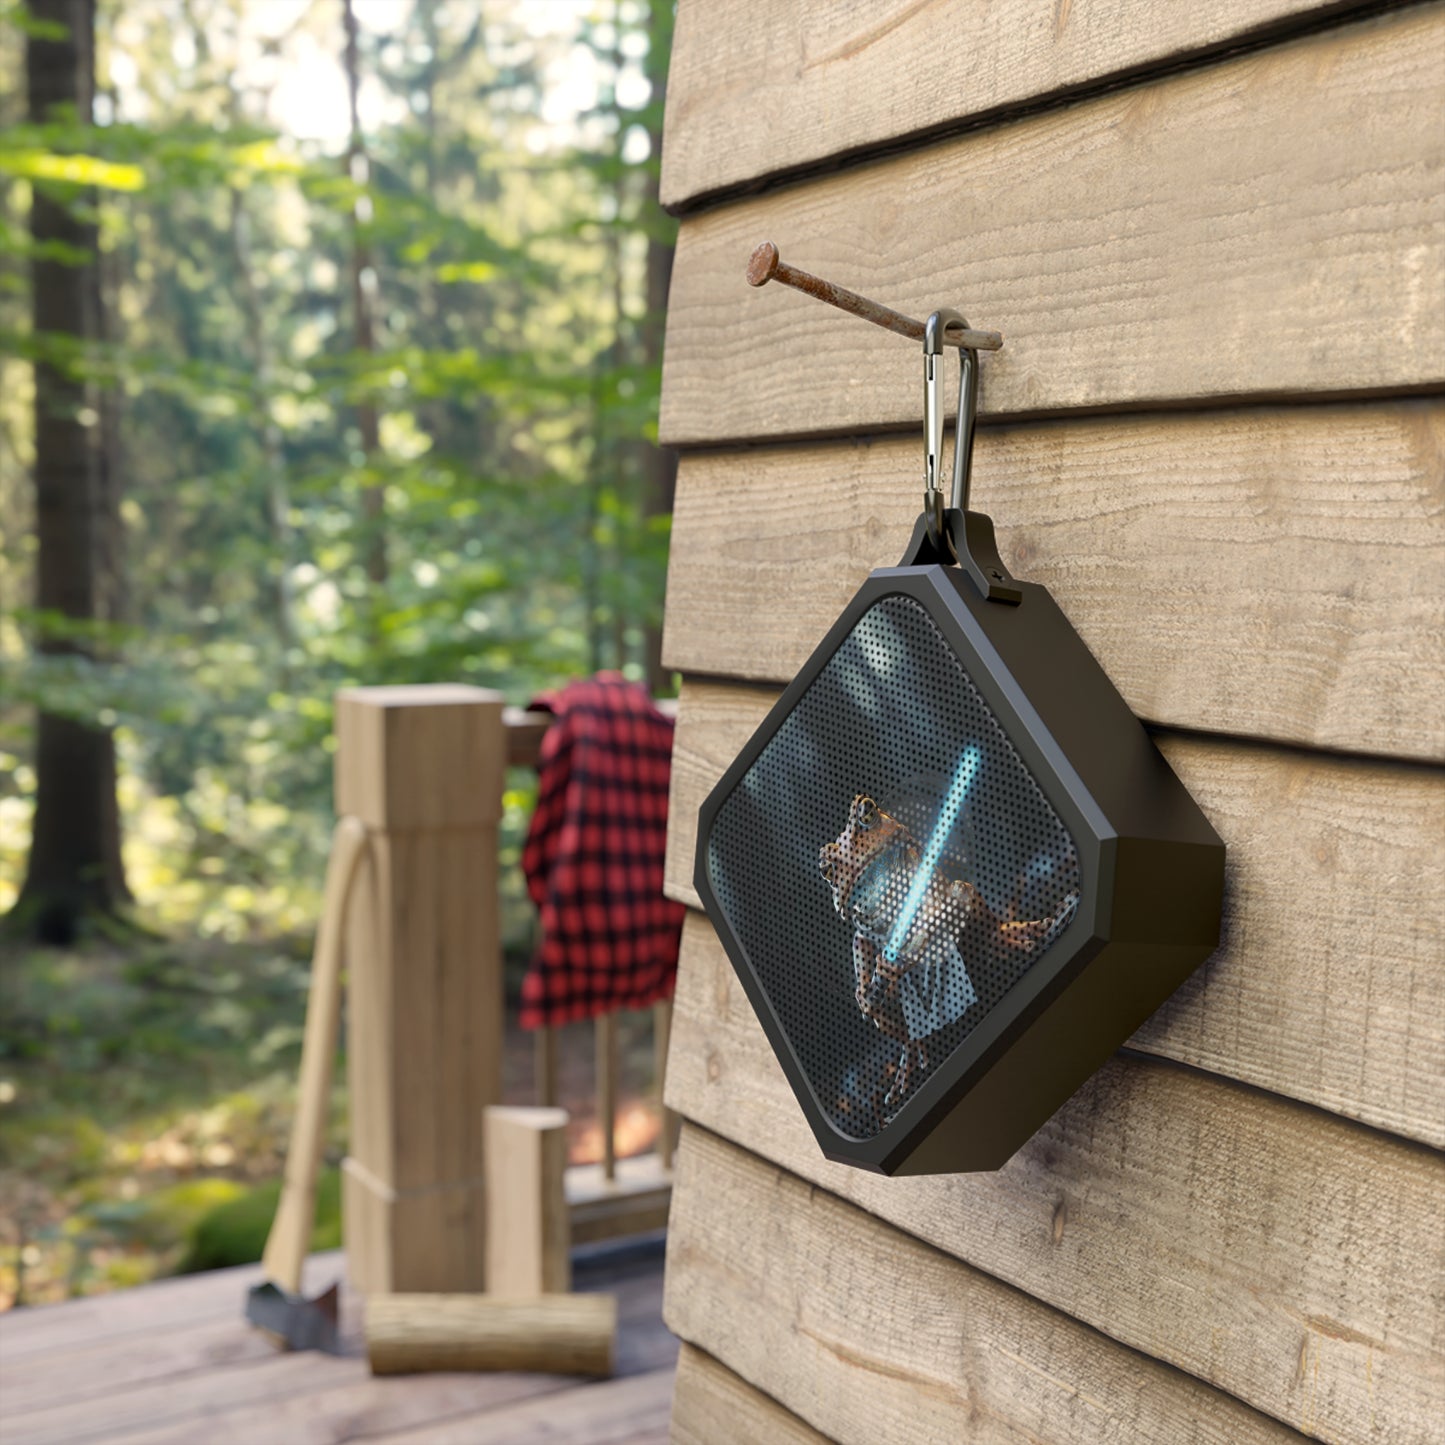 Blackwater Outdoor Bluetooth Speaker, Frog Design, 3W Output, IPX6 Water Resistant, Built-in Mic, Carabiner Clip